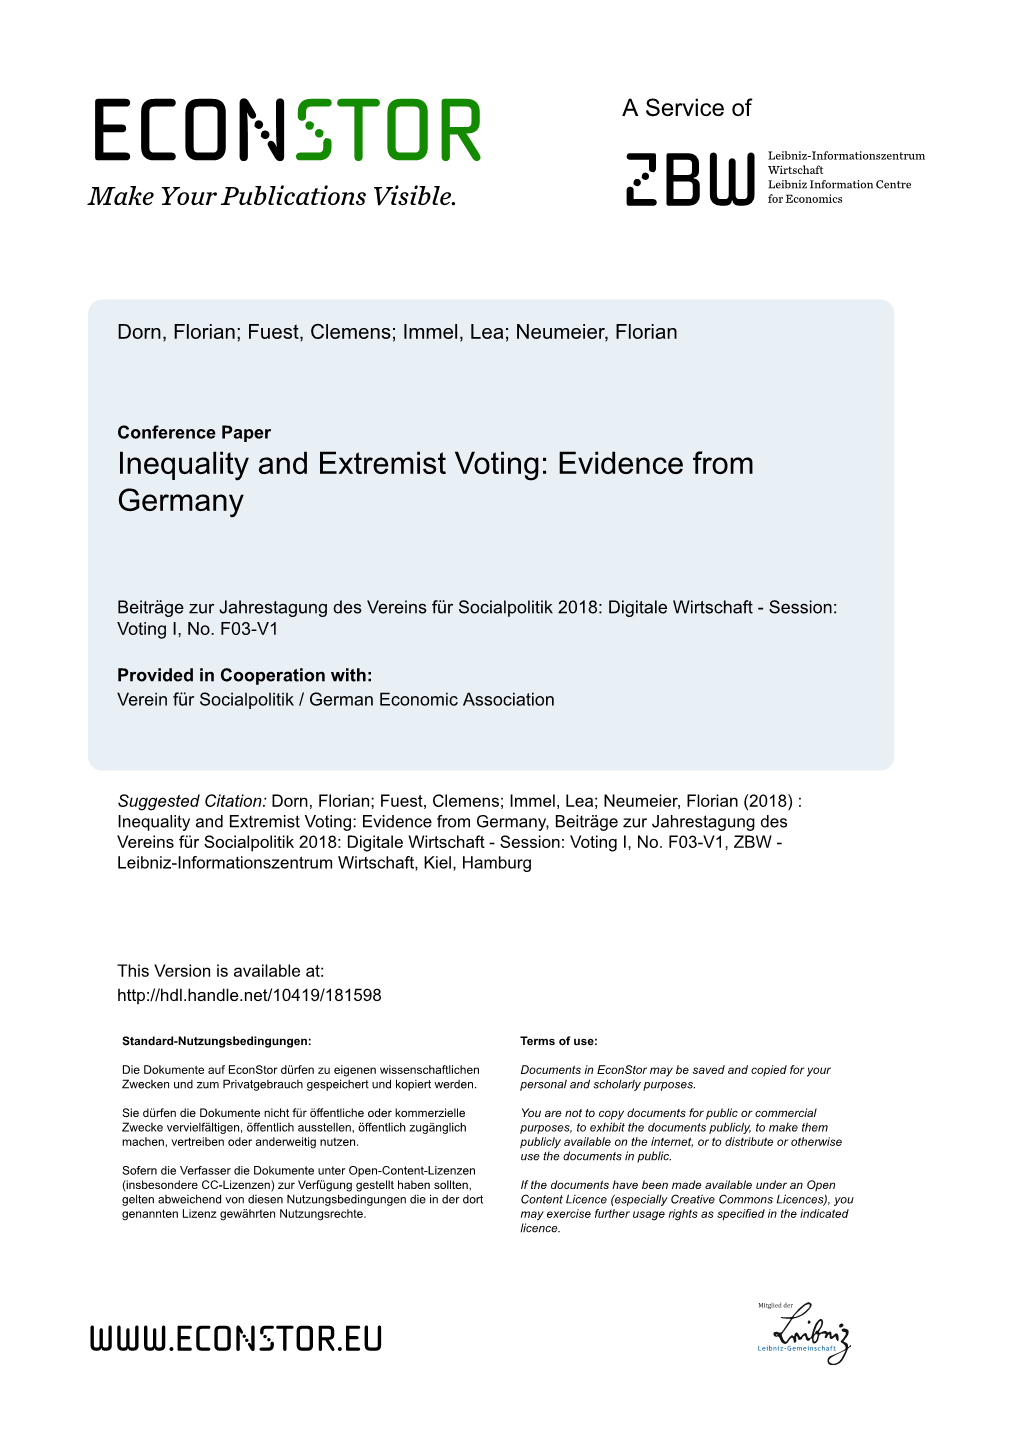 Inequality and Extremist Voting: Evidence from Germany